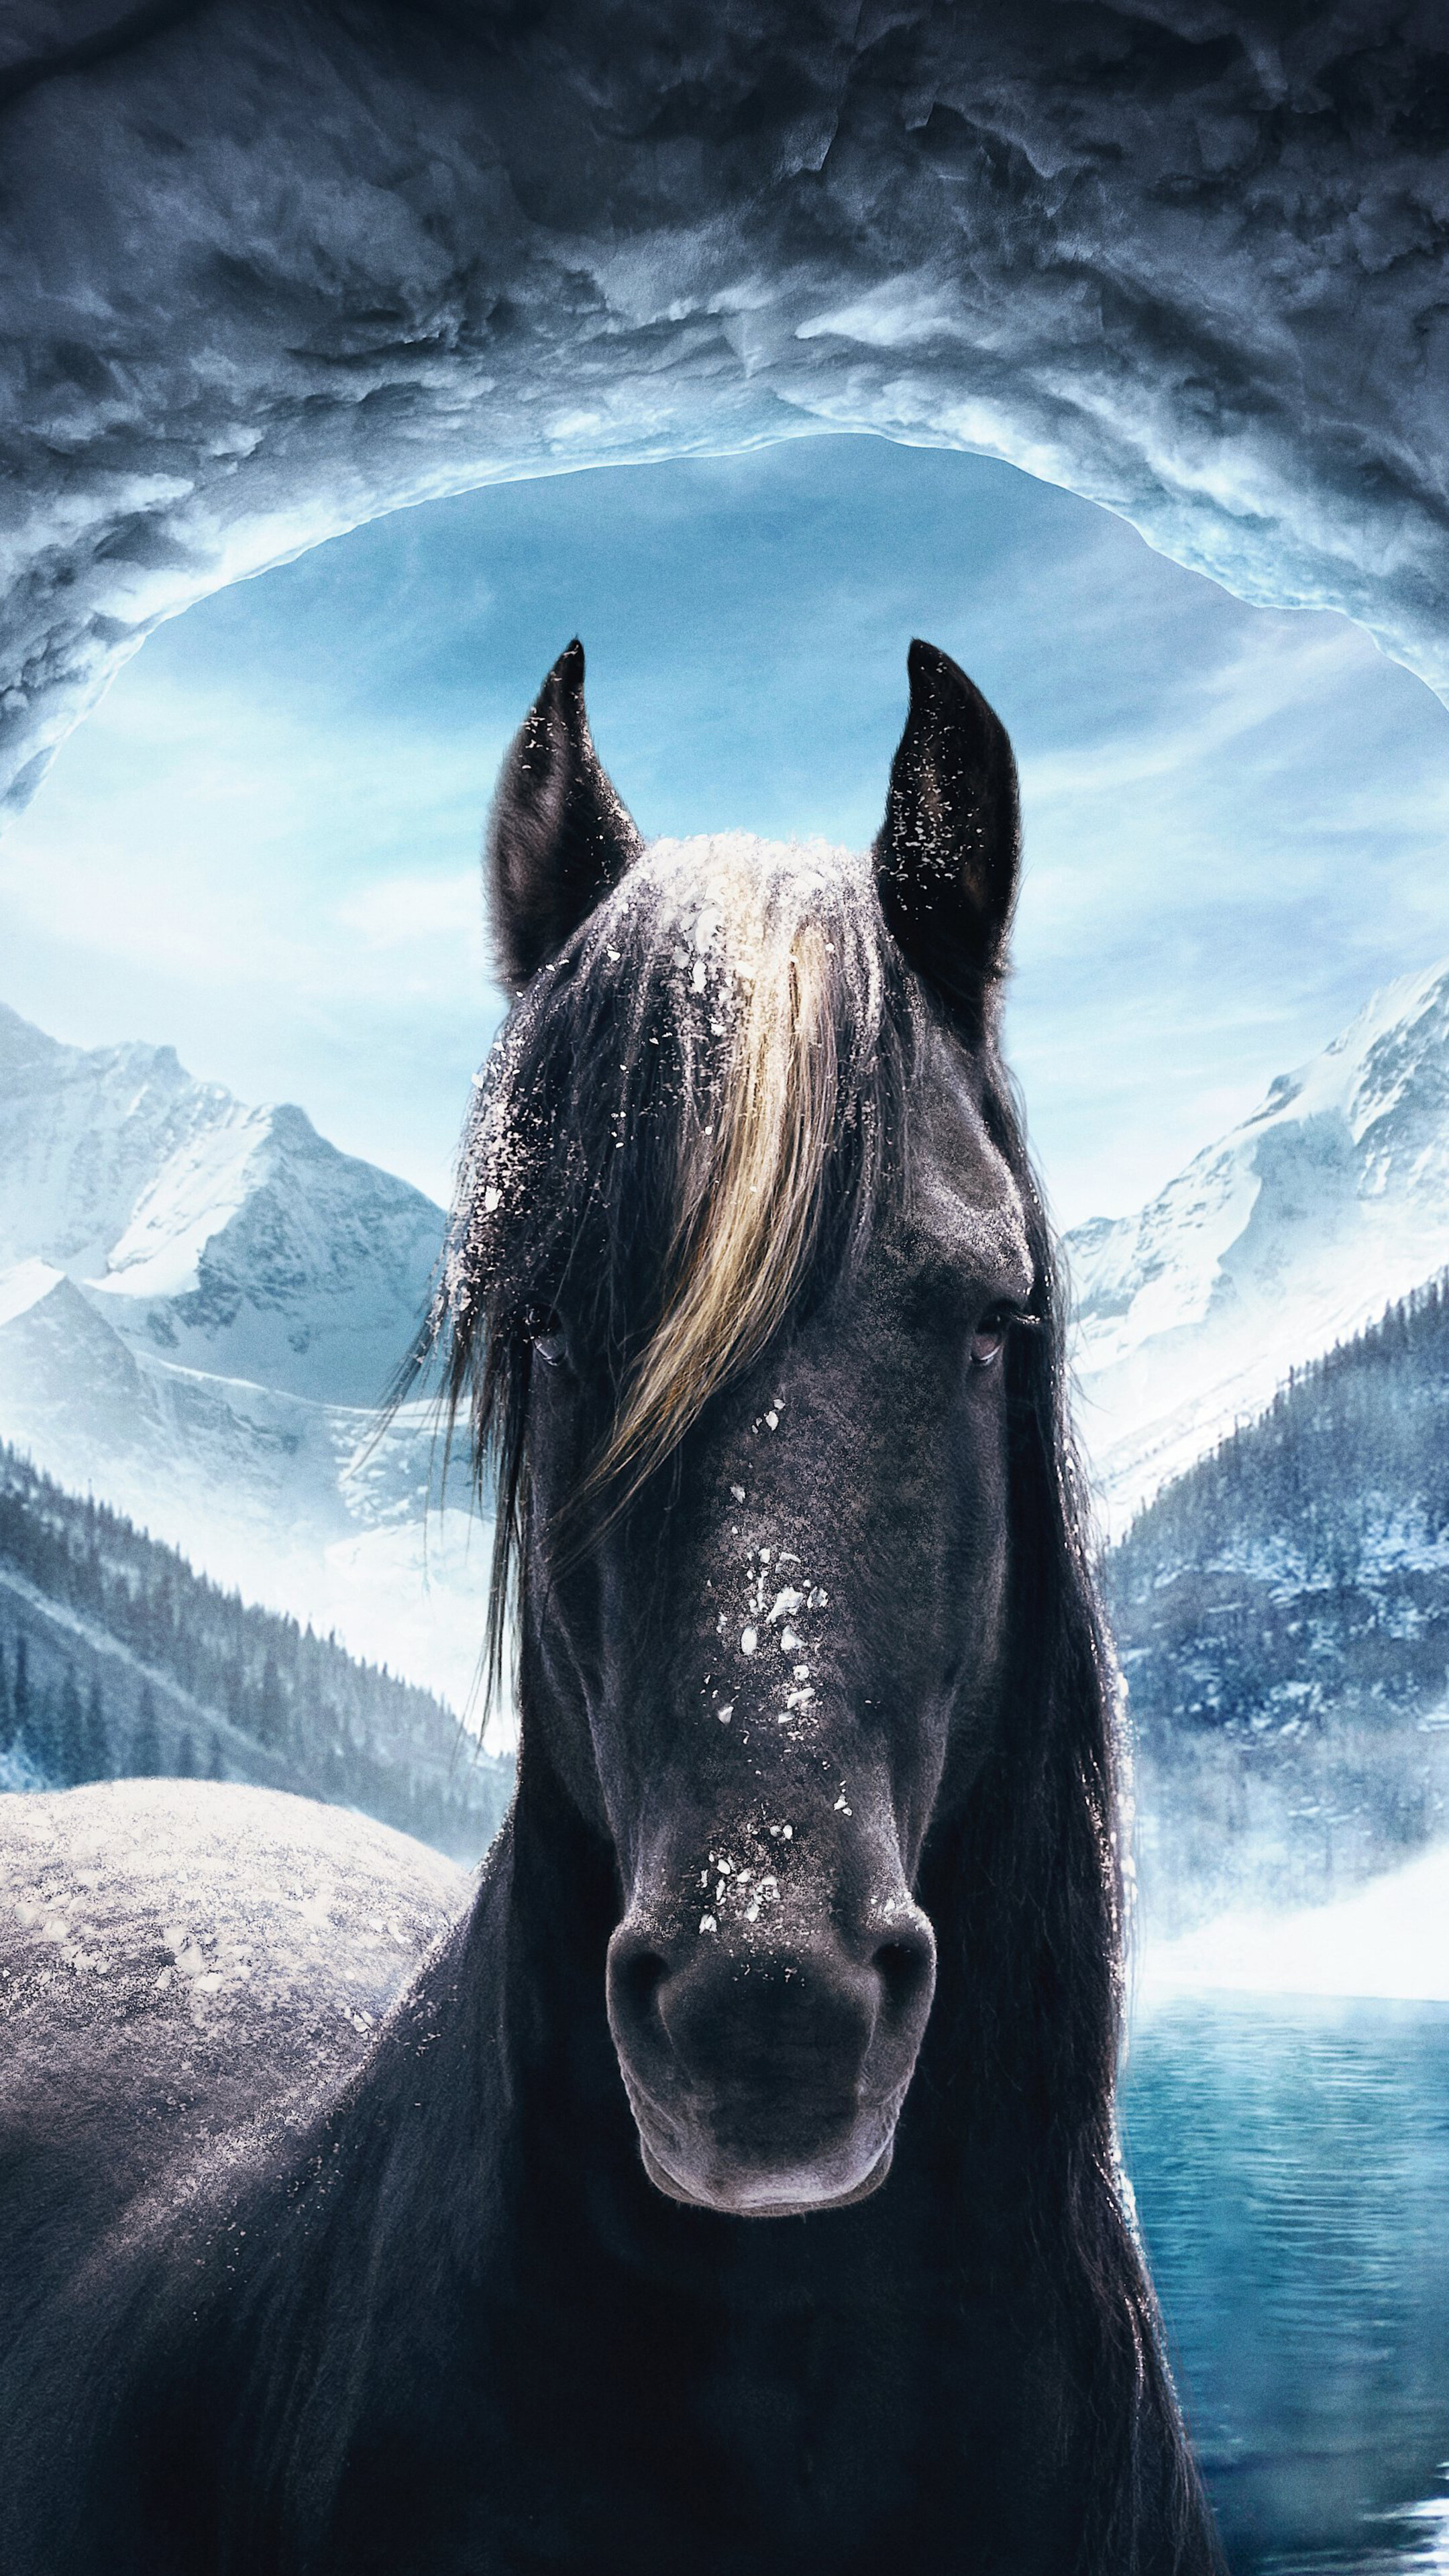 Equestrian-themed wallpapers, Horse lovers' delight, Amazing visuals, Stunning HD quality, 2160x3840 4K Phone